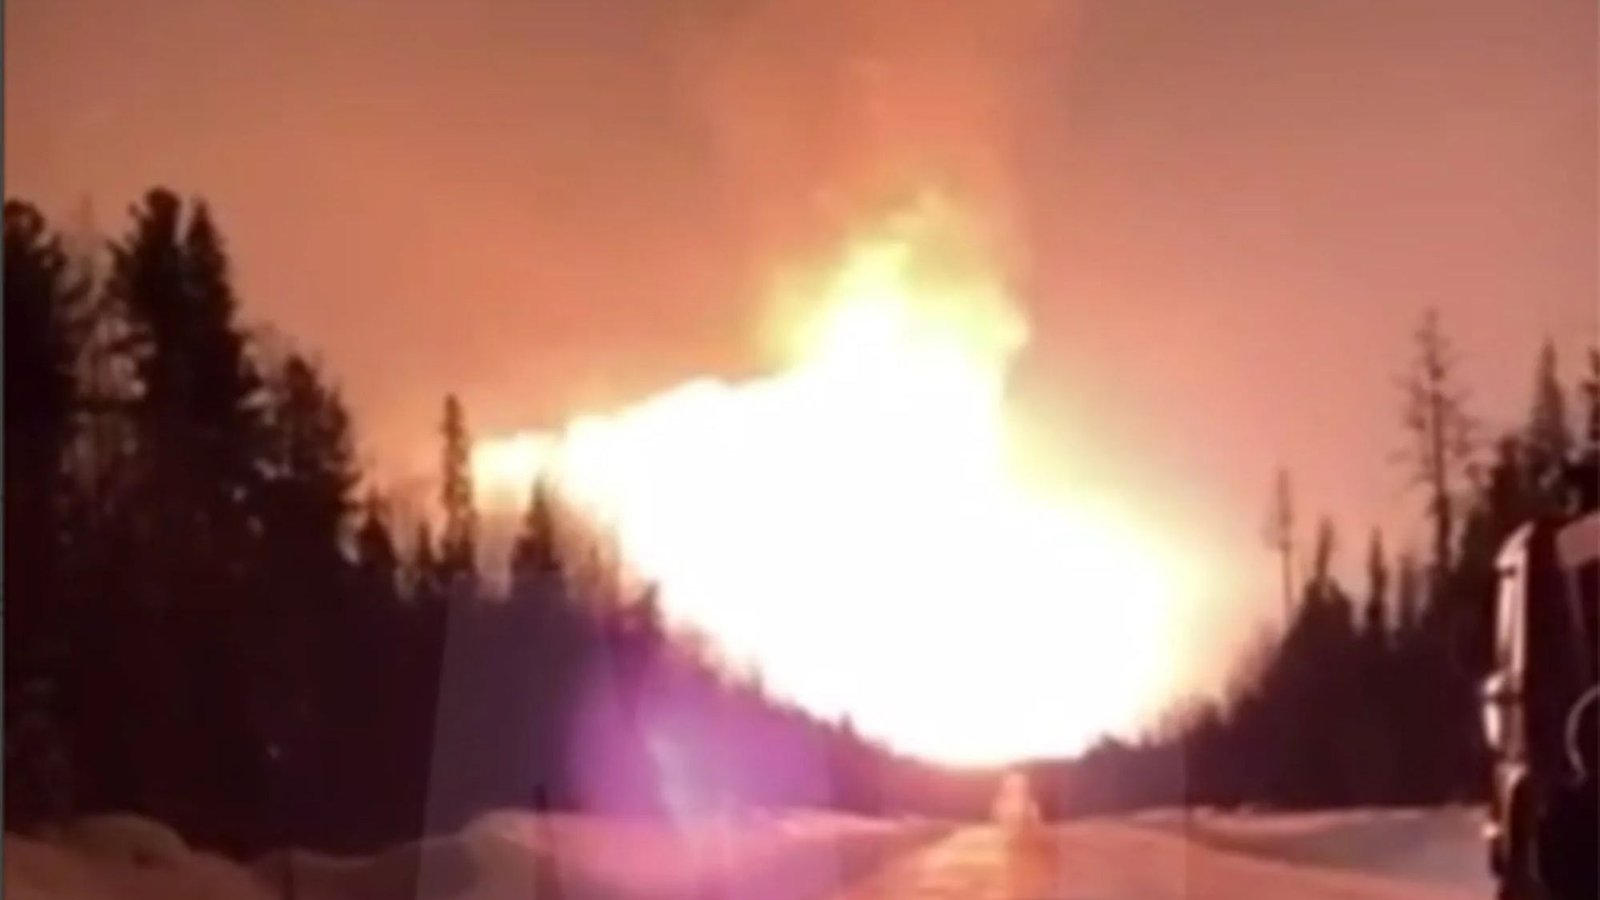 Putins key gas pipeline rocked by massive mystery explosion for second time in months sending fireball into the sky